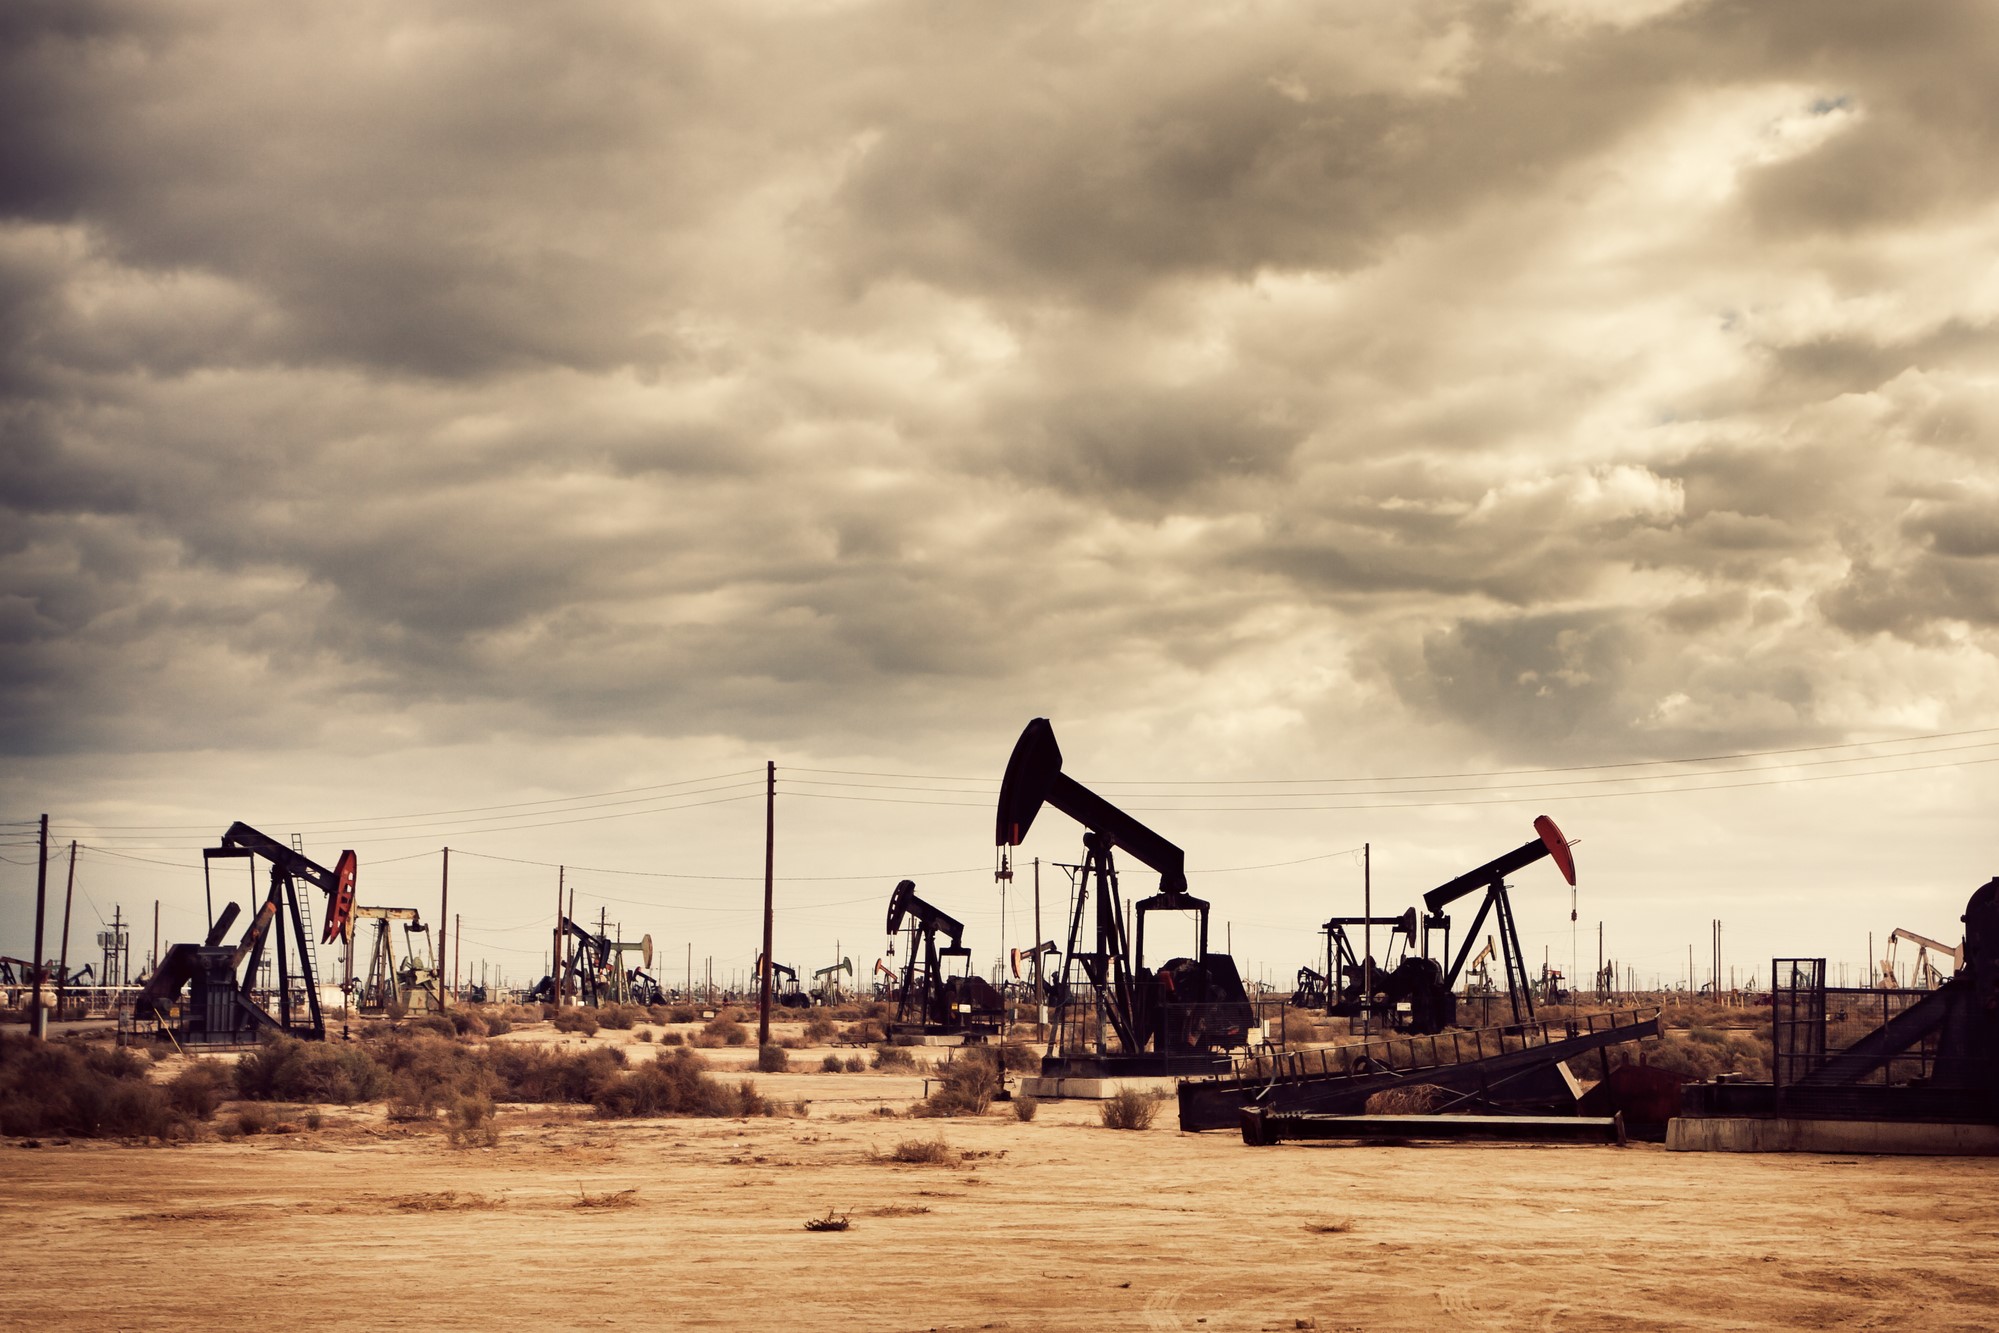 photograph of oil pumps in the desert